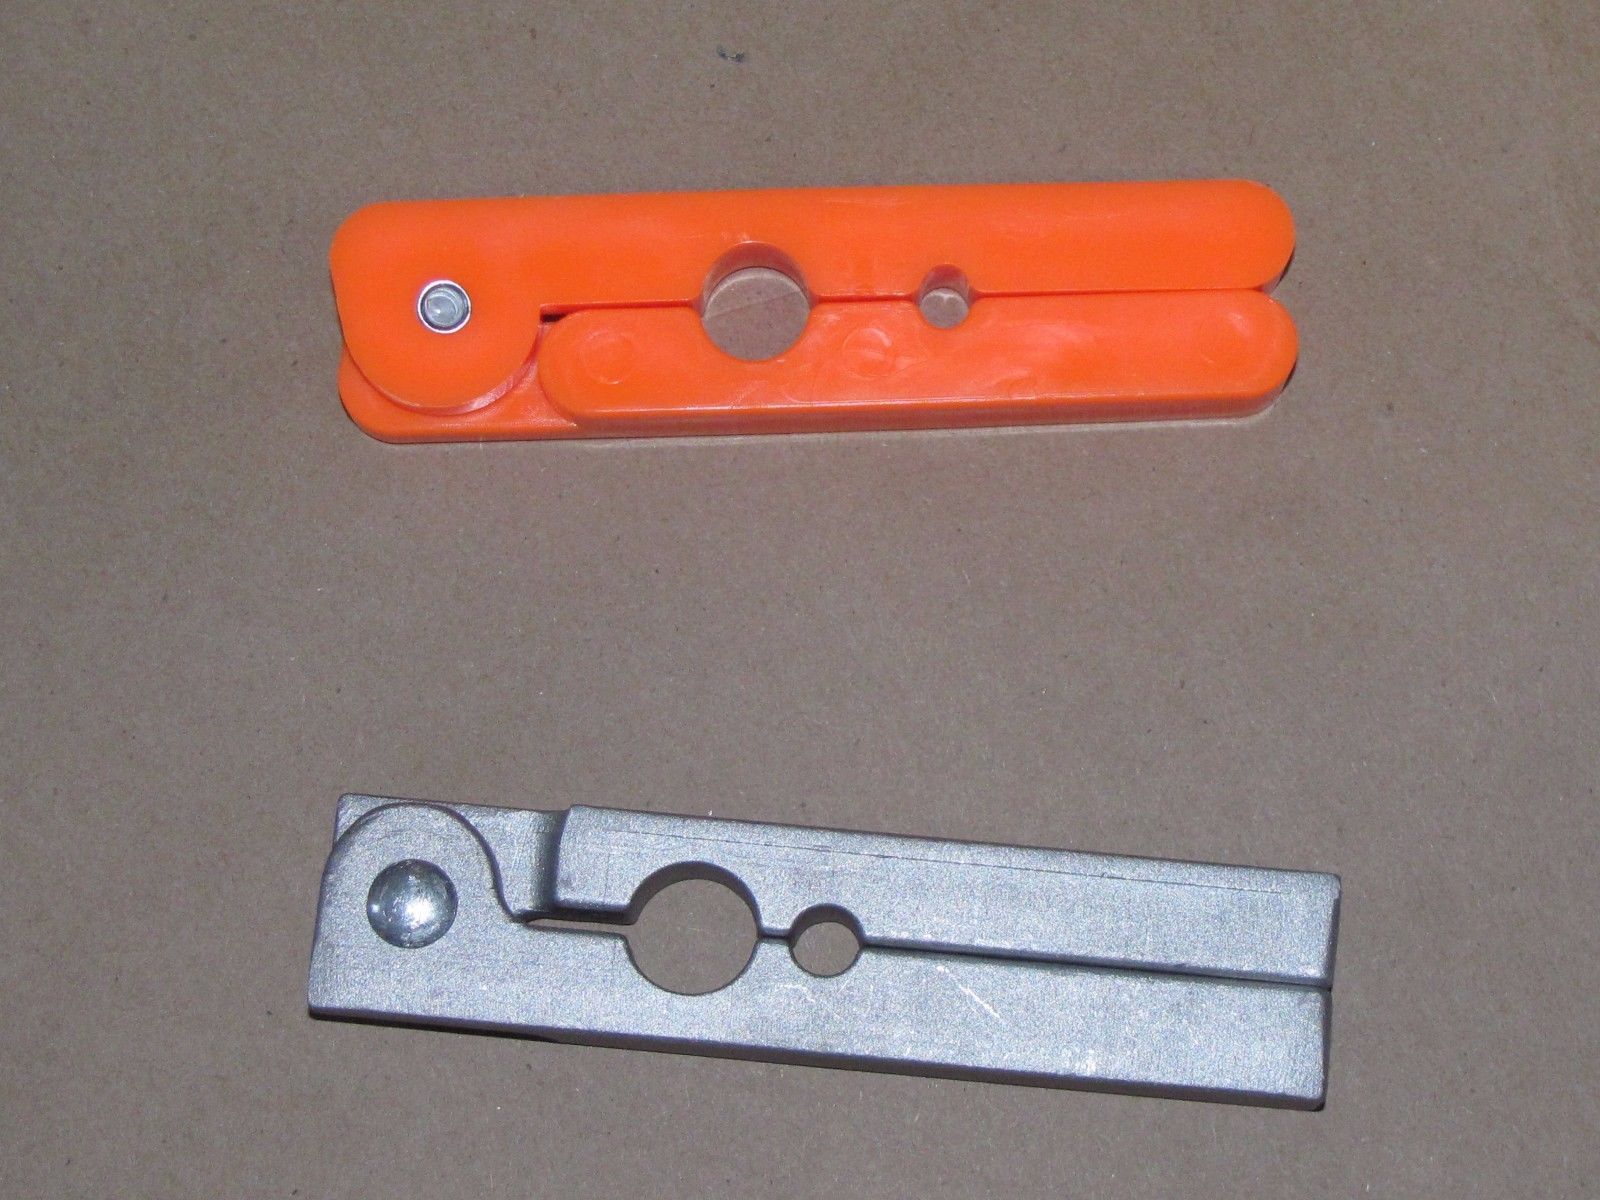 Tail Strippers,Choice Plastic or Aluminum Fur Handling tools fox,coyote,sale new - $6.37 - $14.47